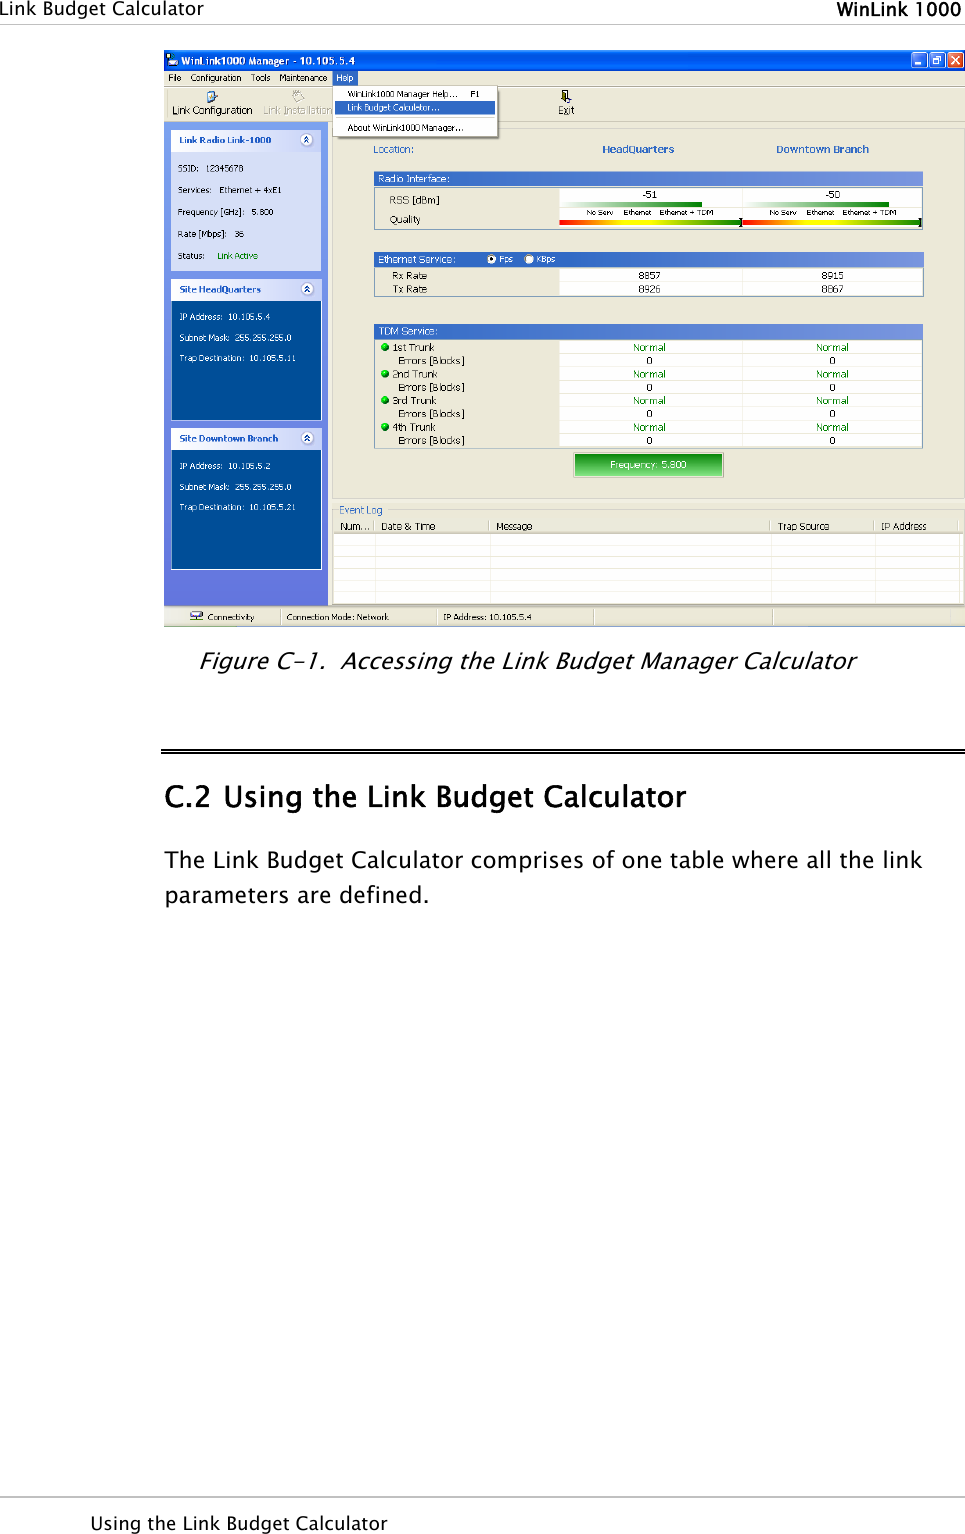   Link Budget Calculator  WinLink 1000   Figure C-1.  Accessing the Link Budget Manager Calculator C.2 Using the Link Budget Calculator The Link Budget Calculator comprises of one table where all the link parameters are defined.   Using the Link Budget Calculator   